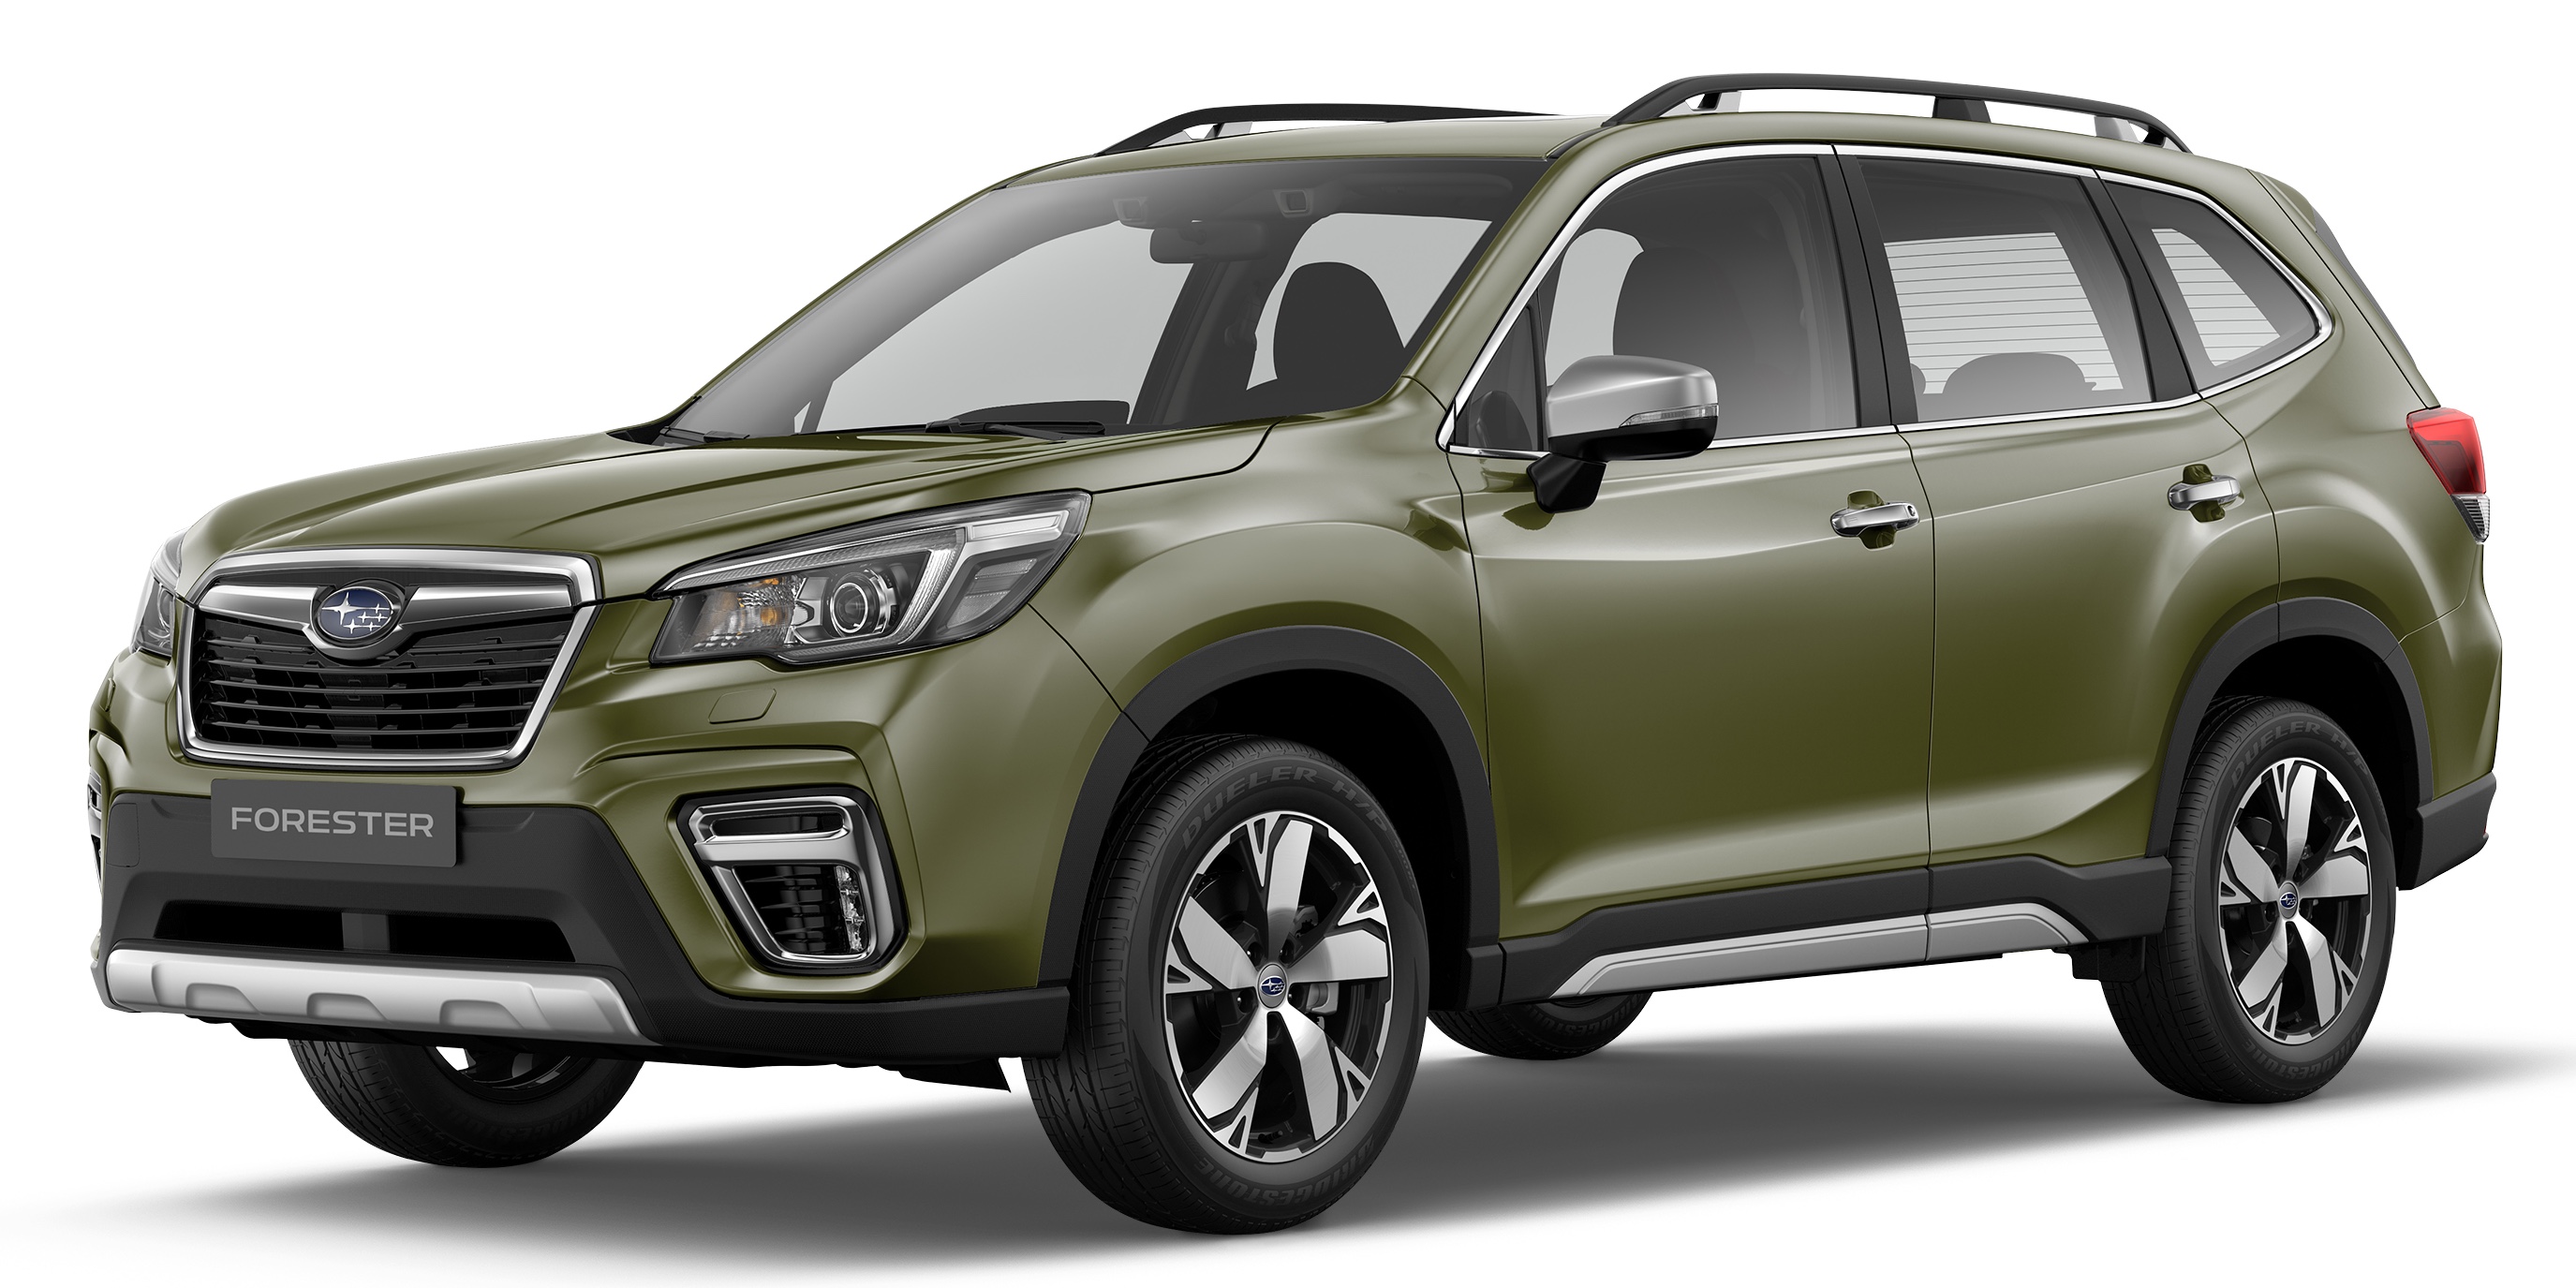 2019 Subaru Forester officially launched in Taiwan four